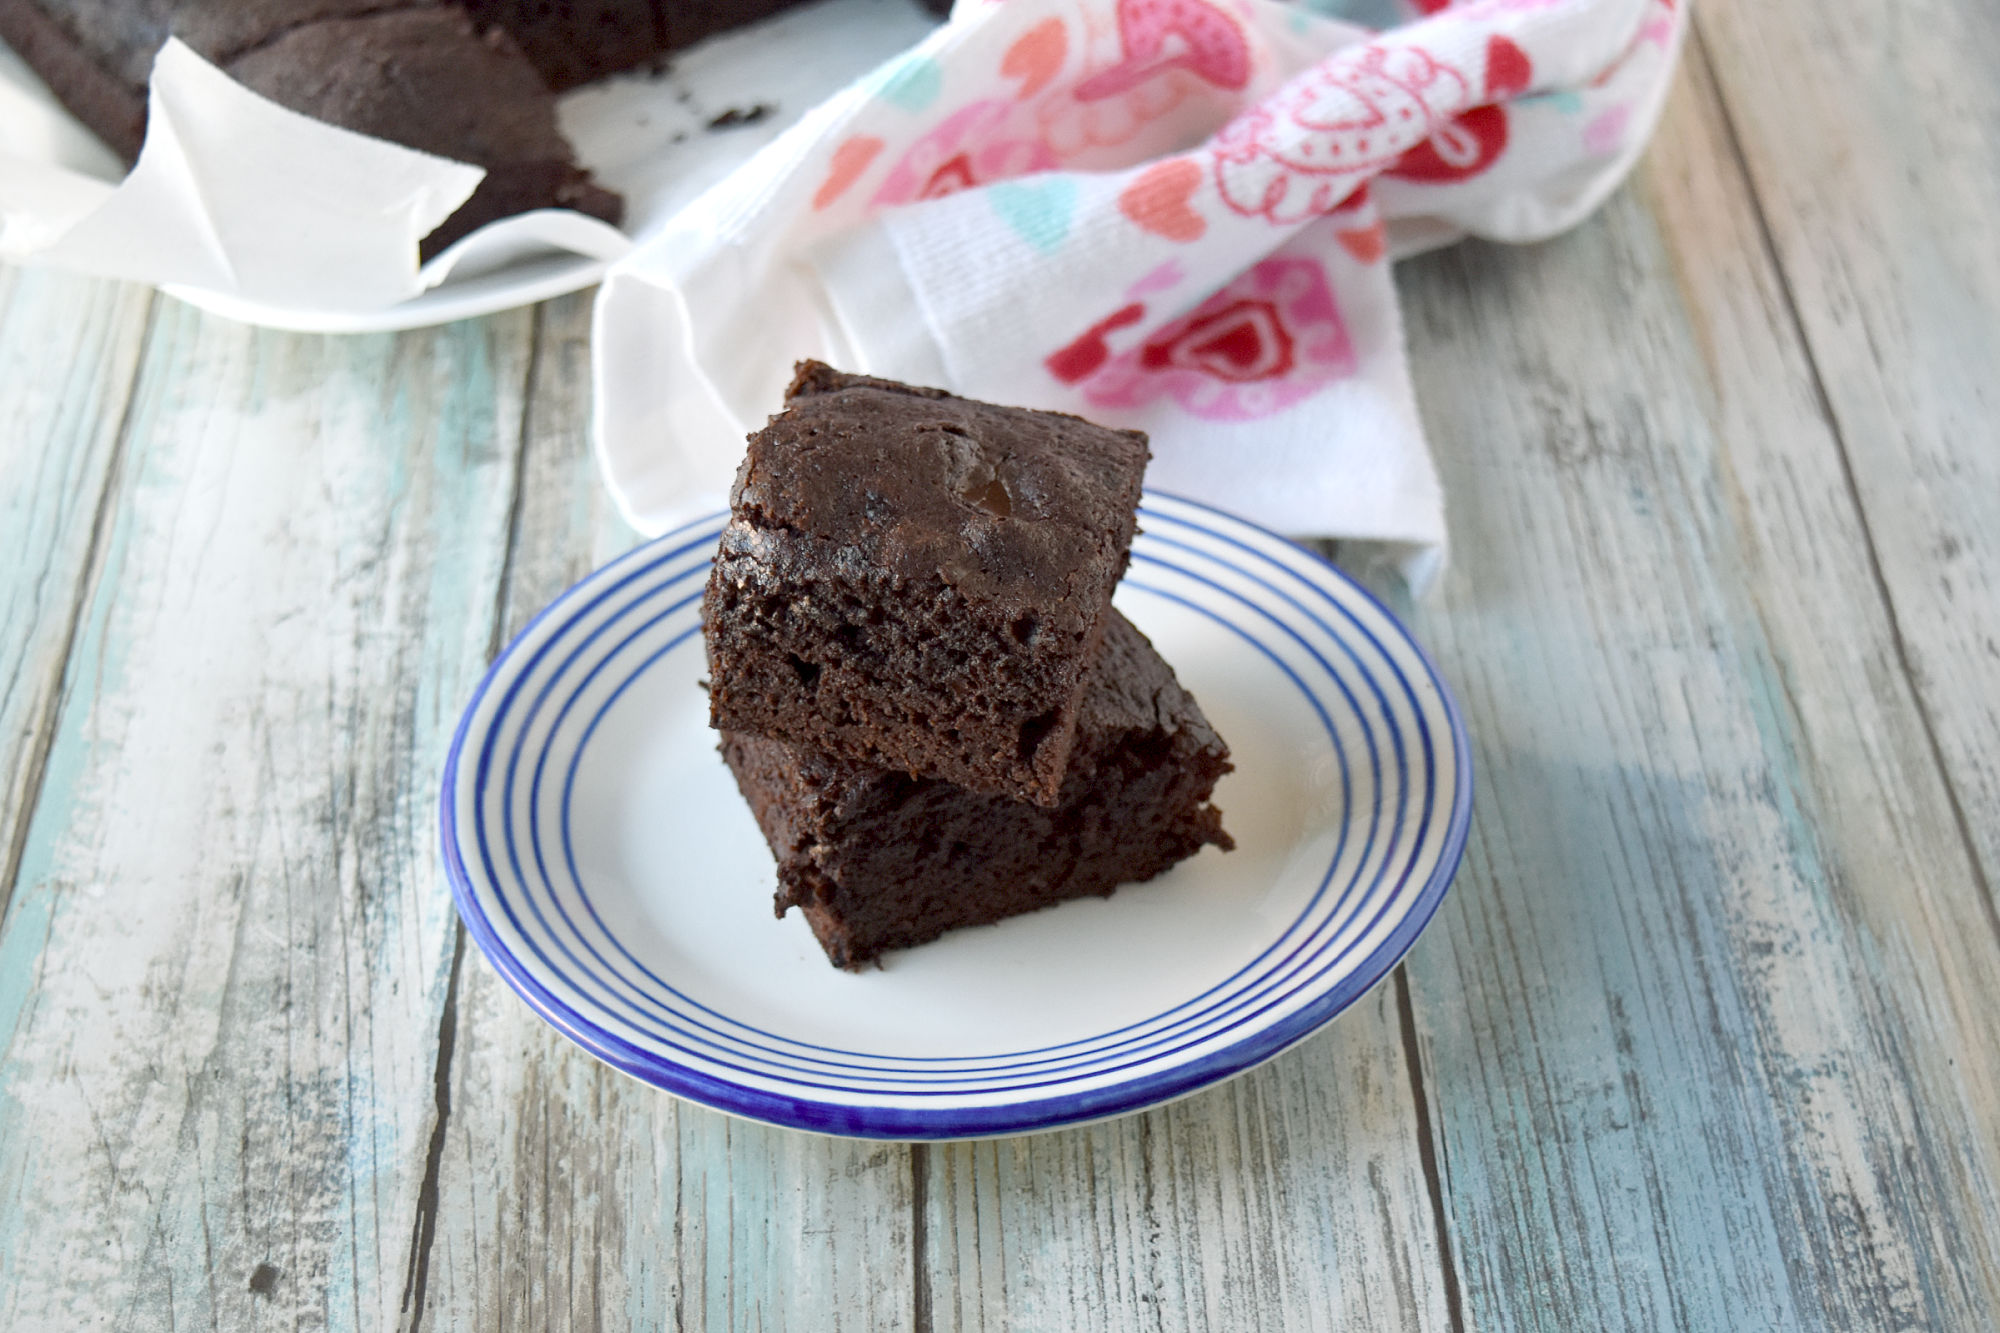 Fudgy One Bowl Brownies are super fudgy and double chocolaty delicious! They’re easy to make and whip up in under 40 minutes start to finish. #ChocolateWeek